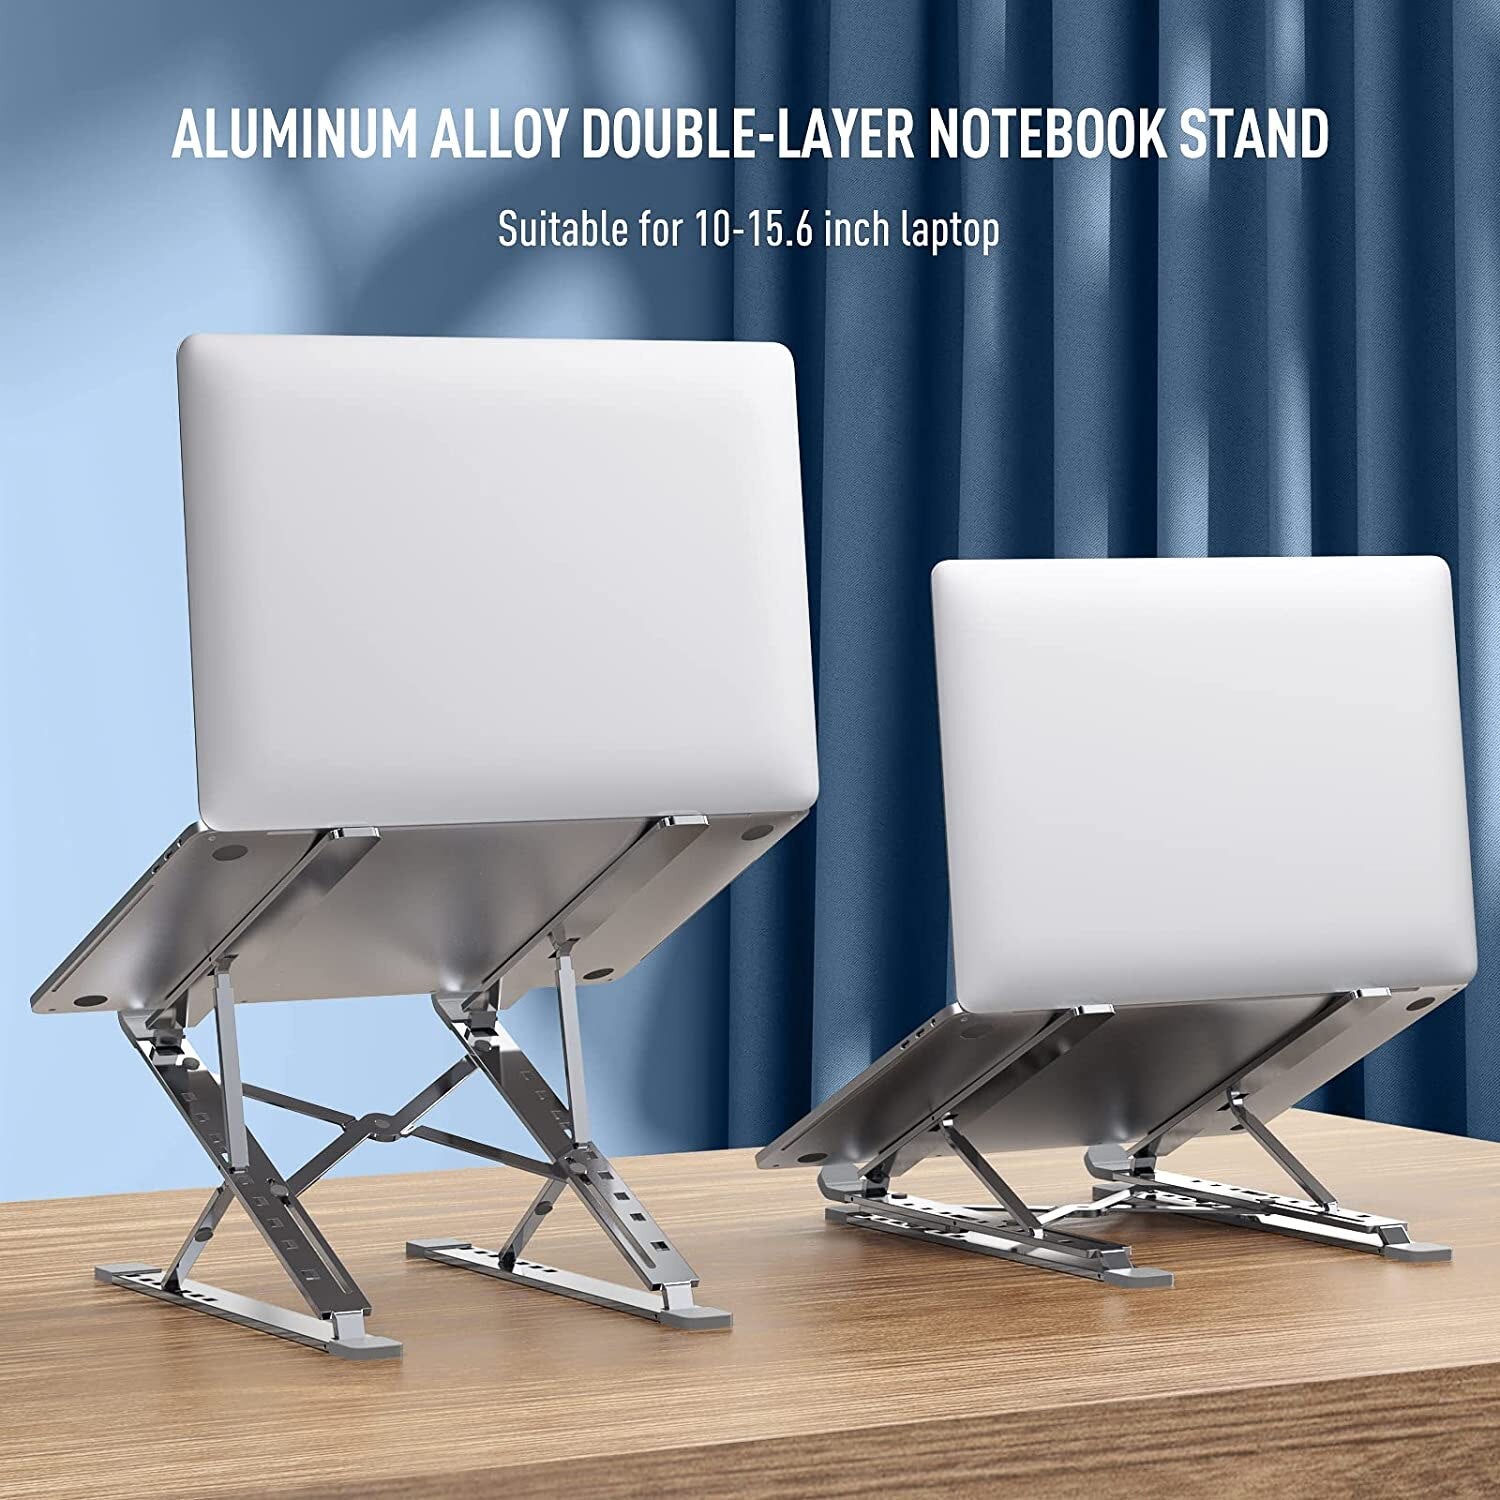 Laptop Stand Double Layer Multi Angle Adjustable Aluminum Alloy Material Suitable For 13-15.6 Inch Notebook